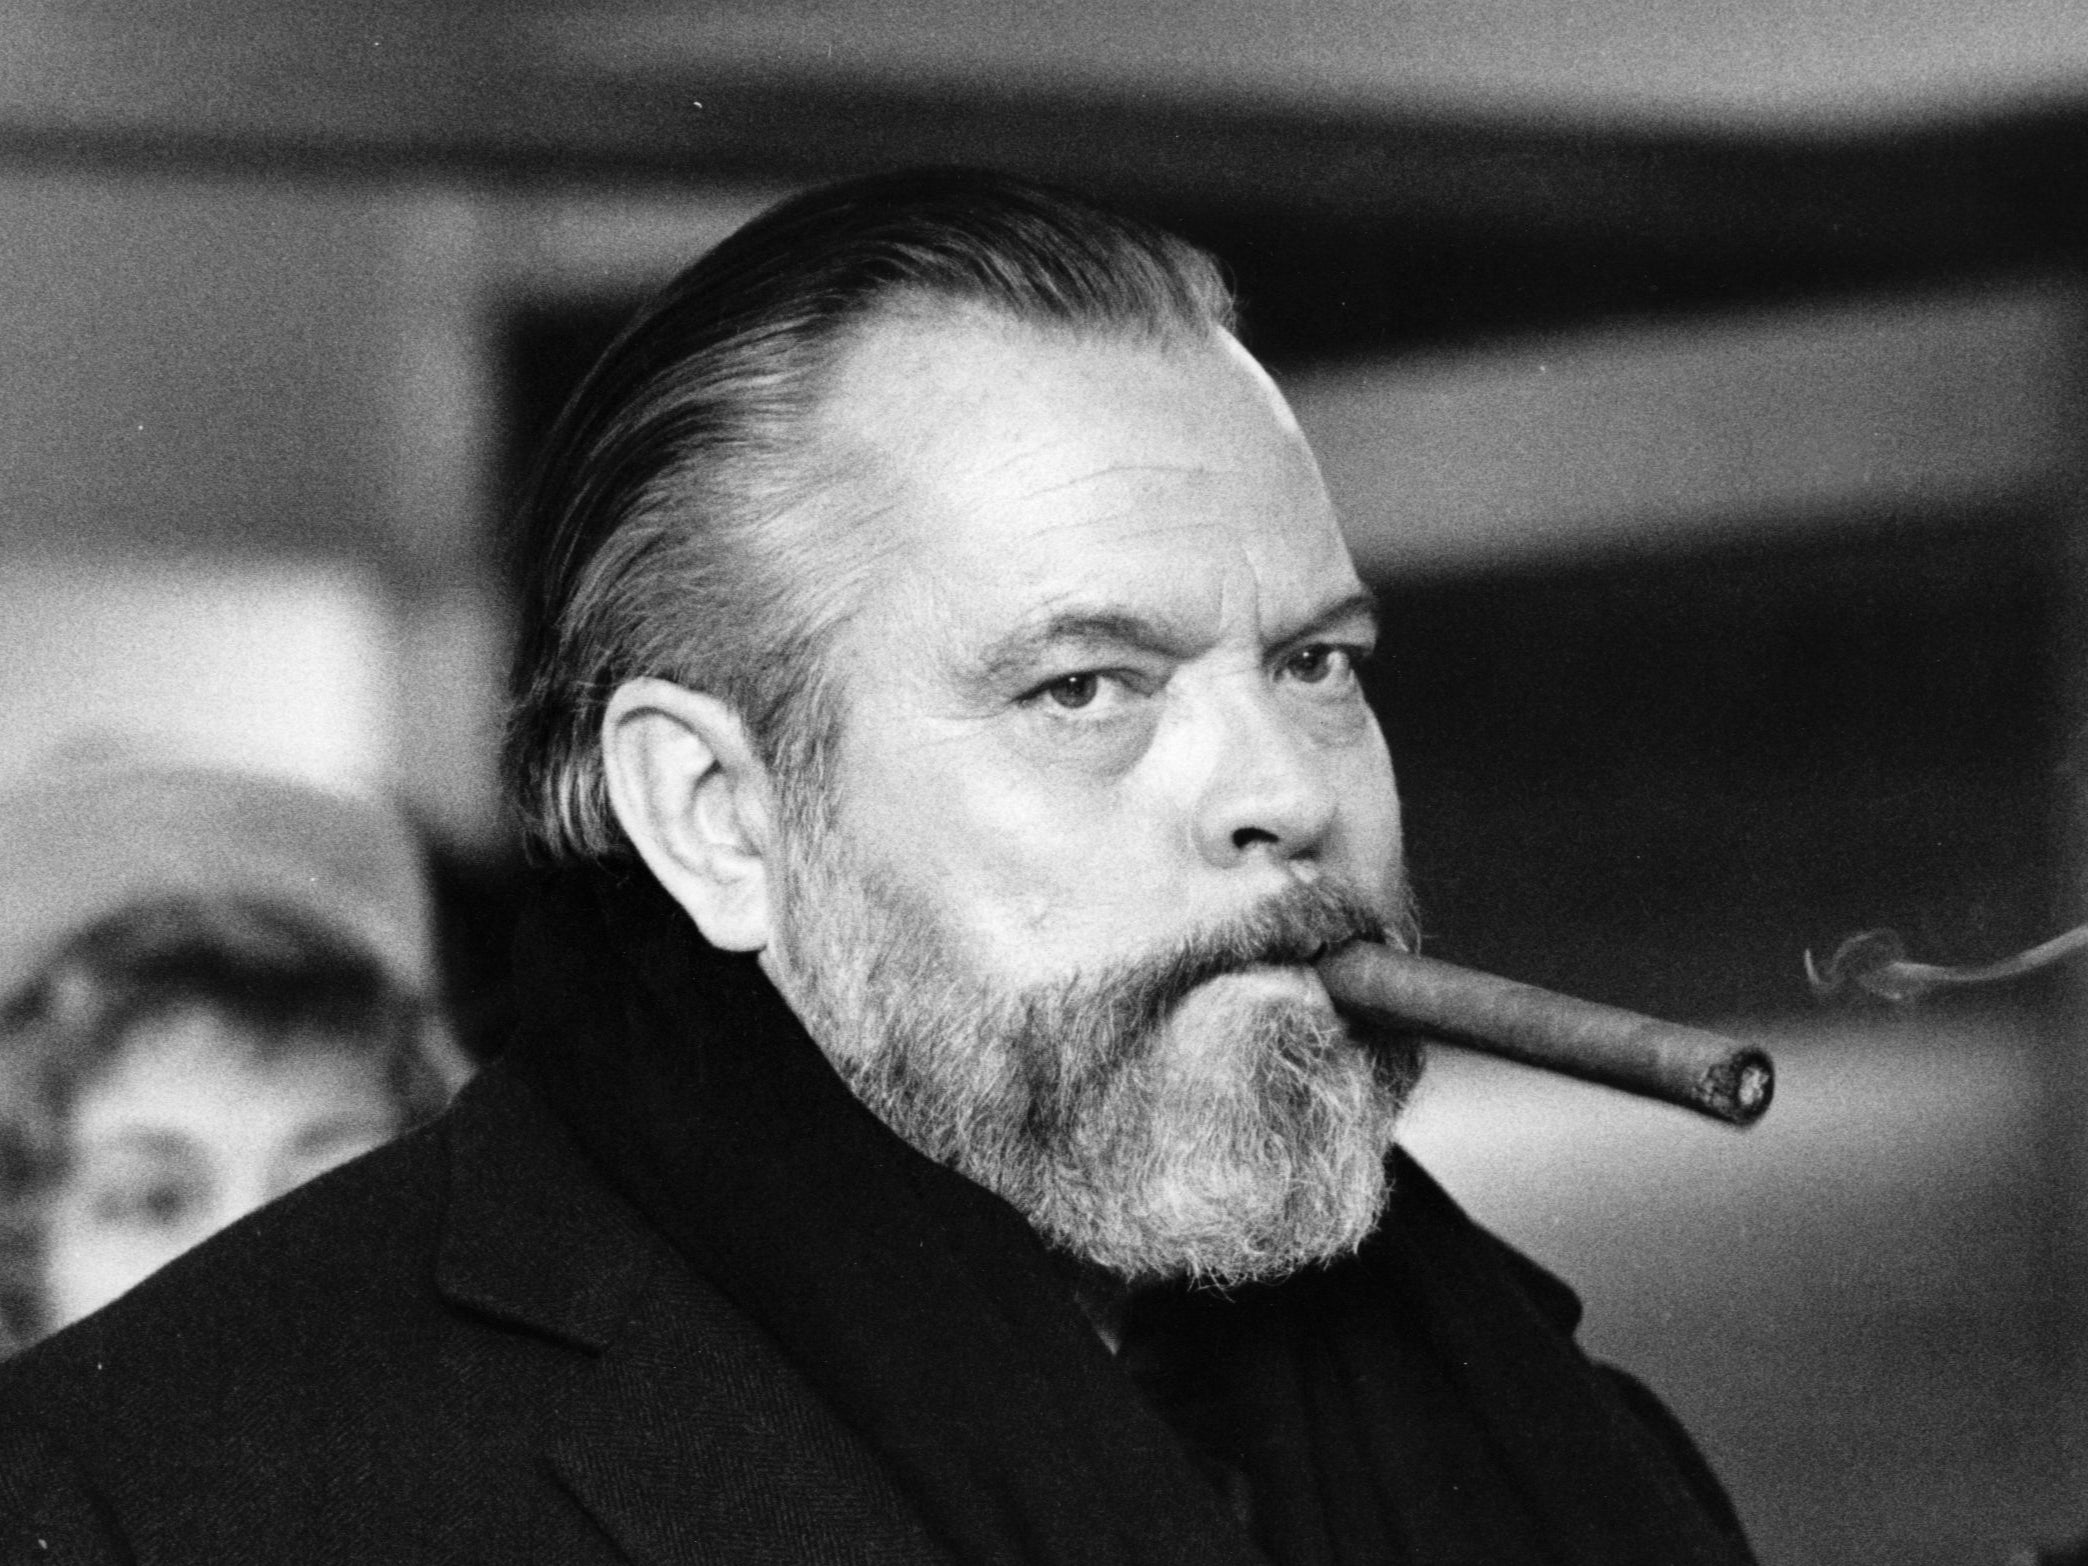 Orson Welles and Herman J Mankiewicz had conflicting ideas about how ‘Citizen Kane’ was written